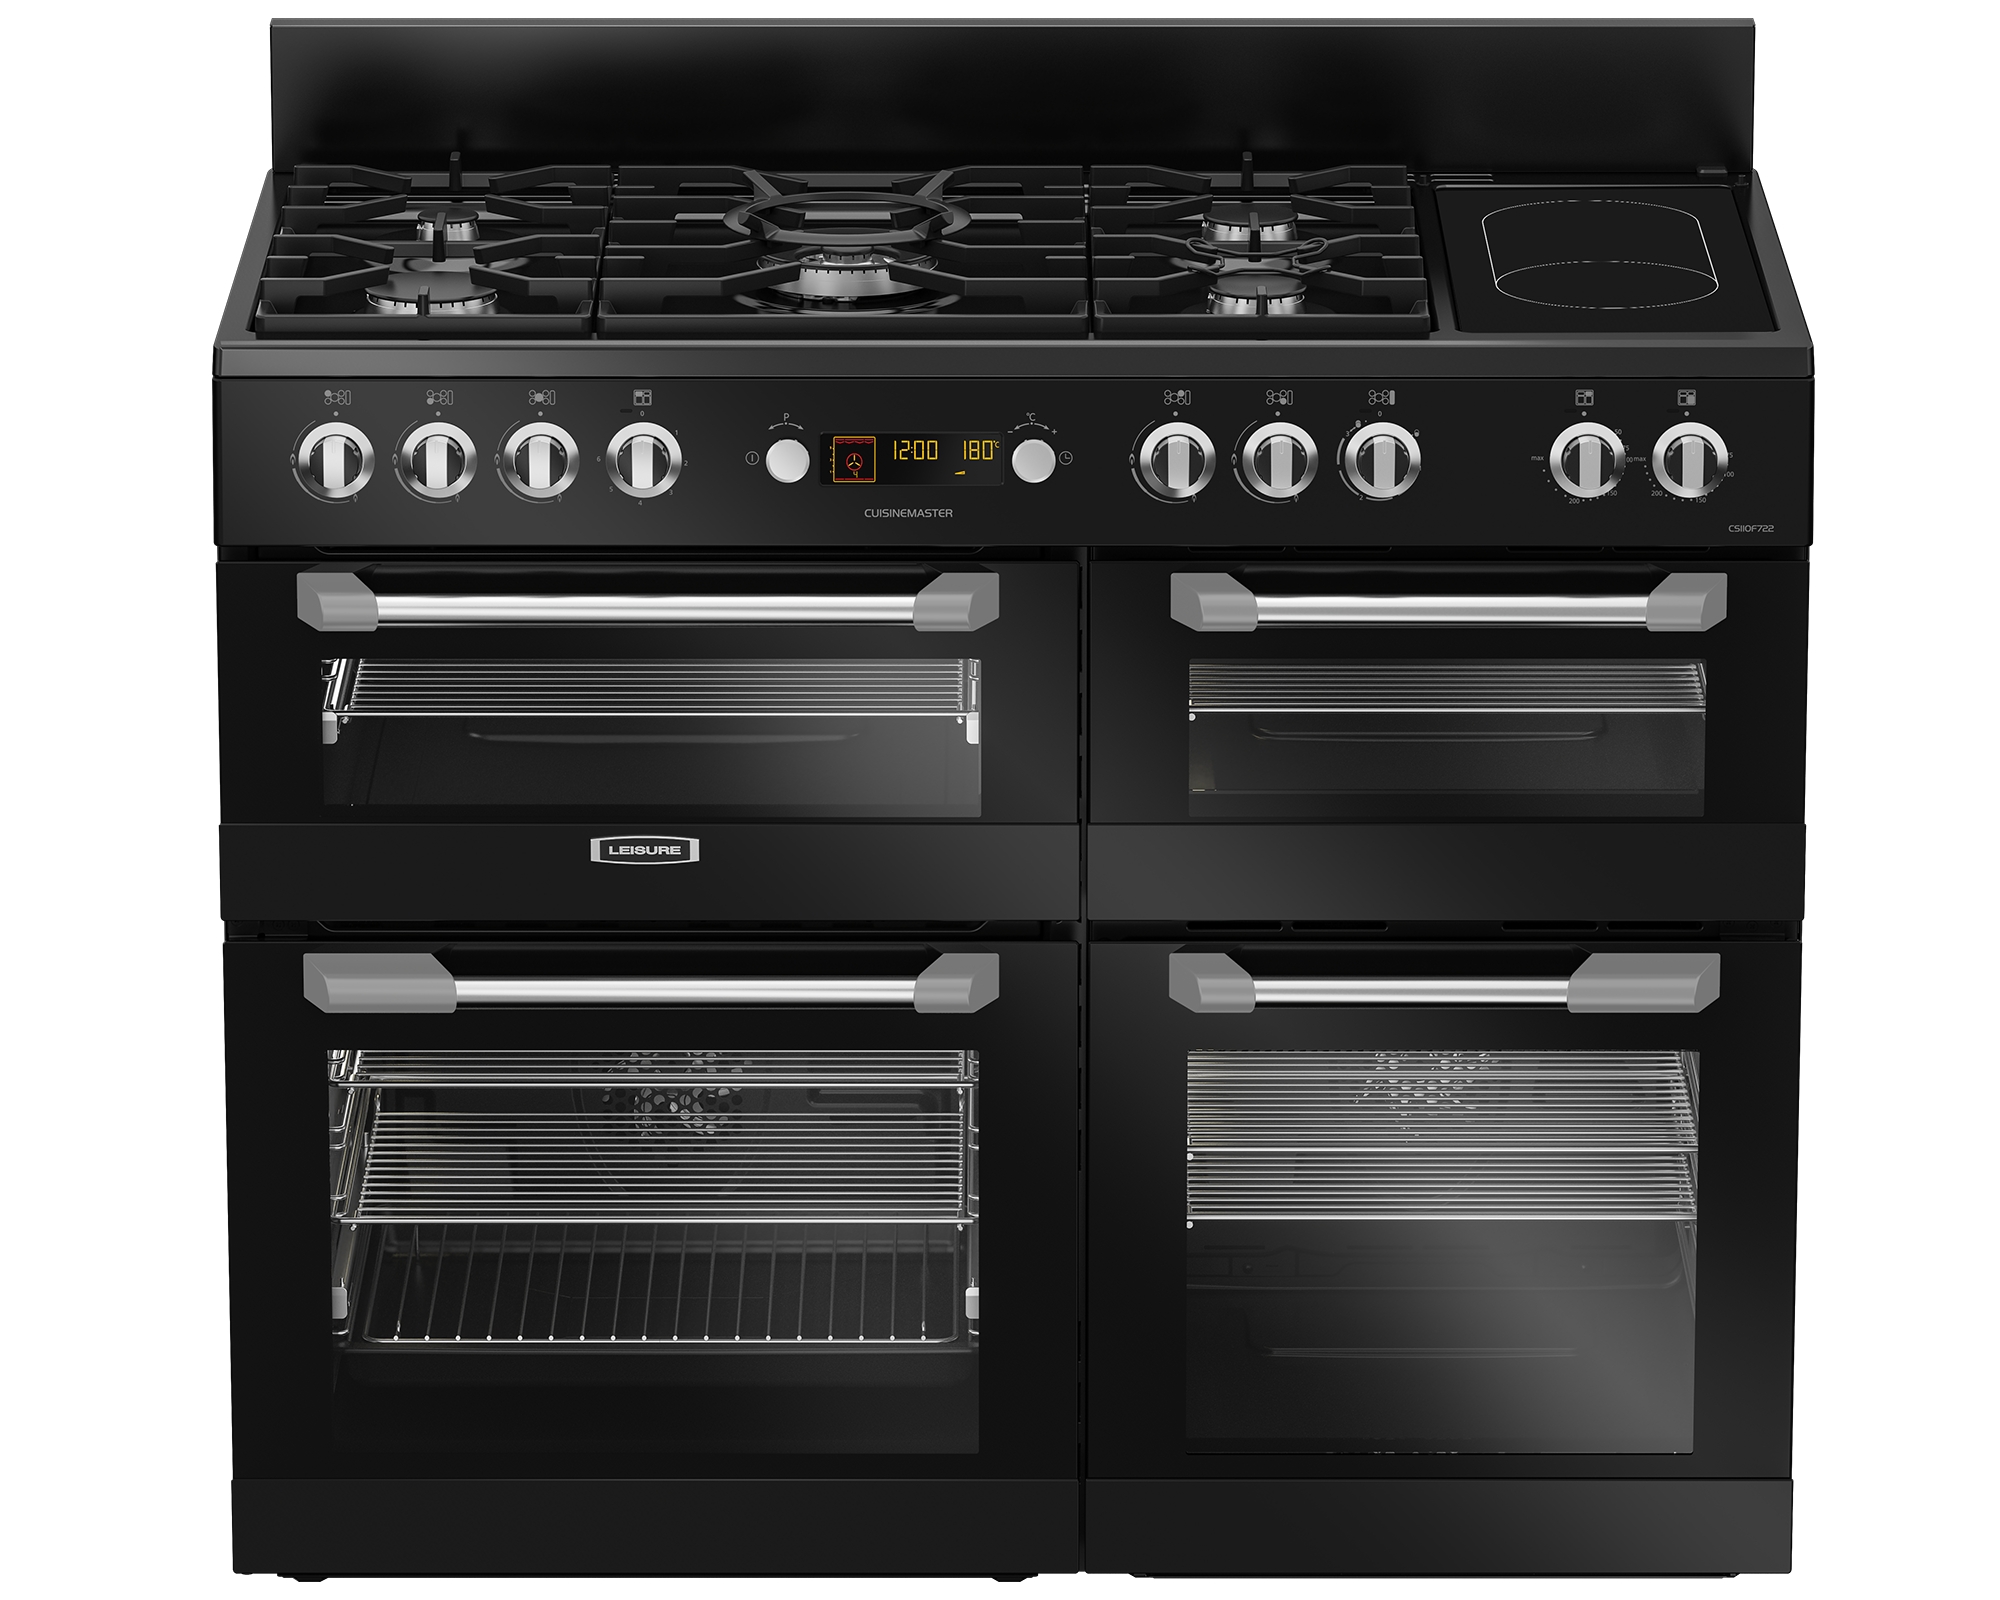 Leisure 110cm Dual Fuel Range Cooker with Three Ovens